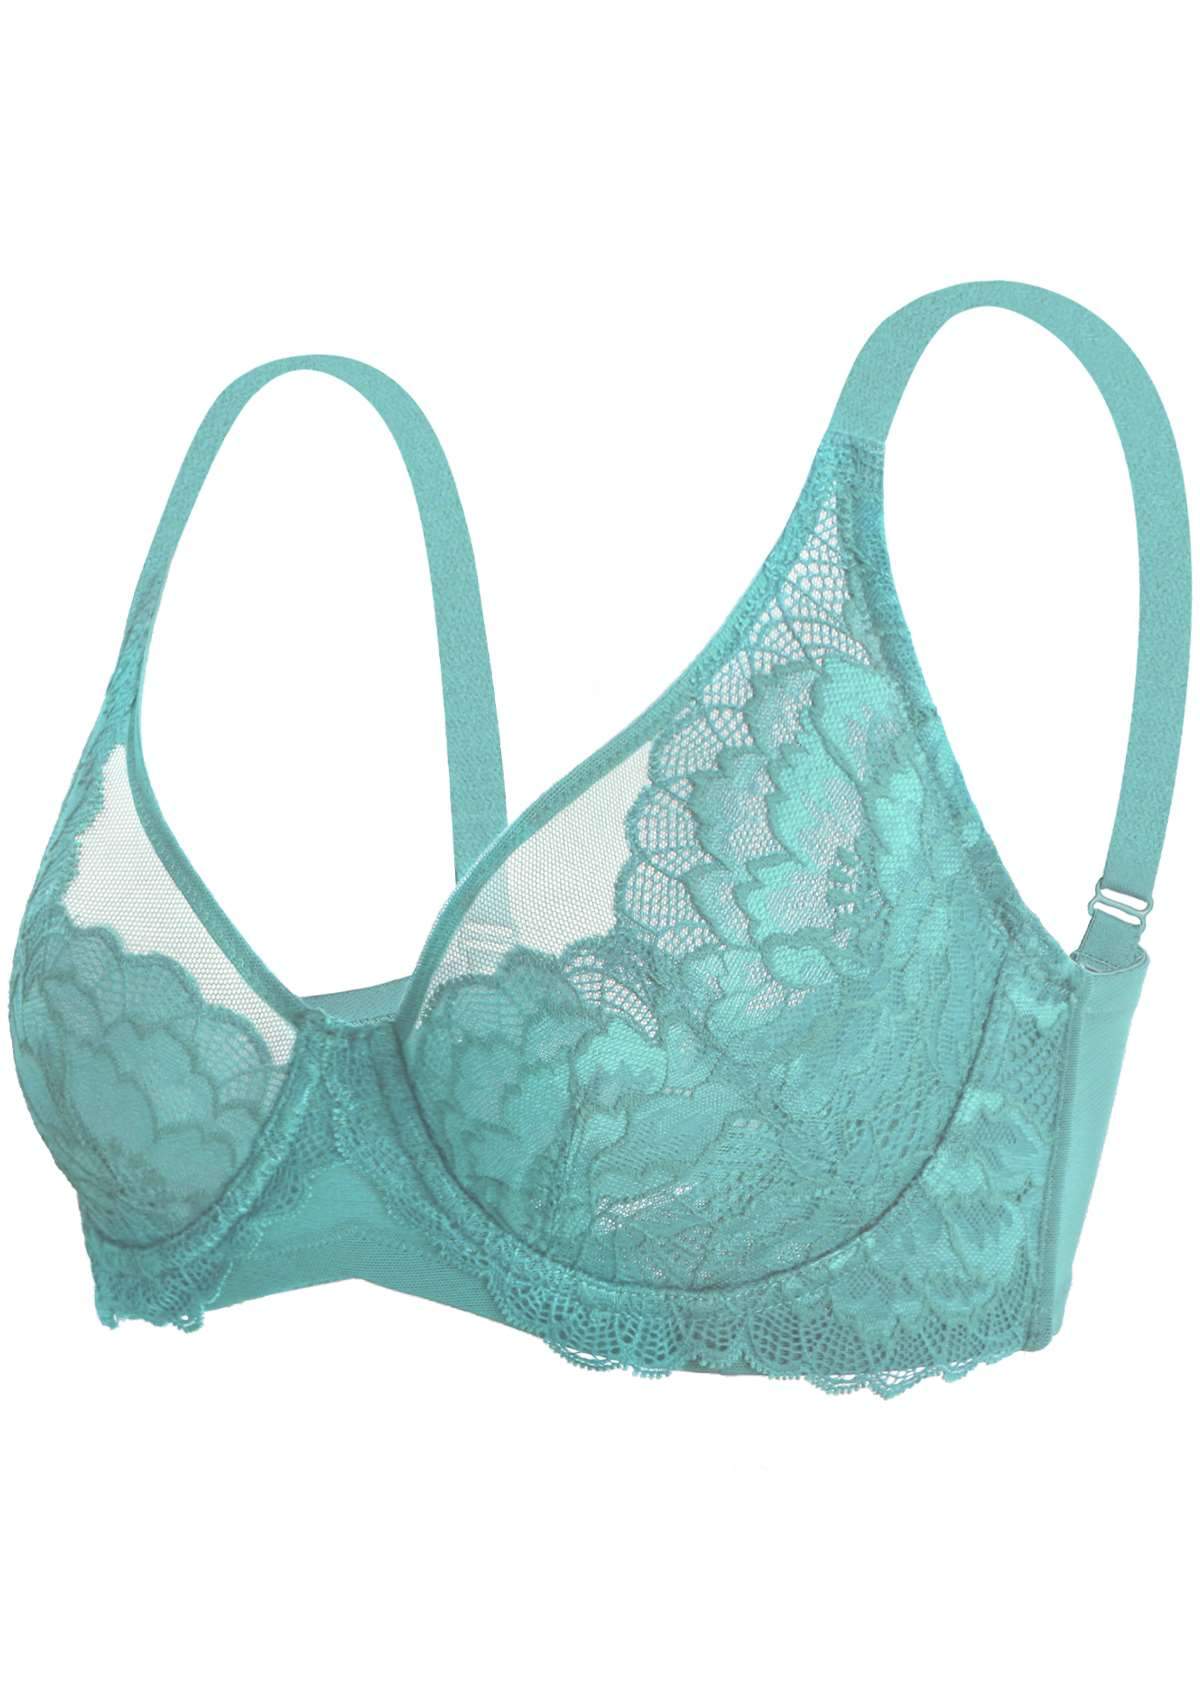 HSIA Peony Lace Unlined Supportive Underwire Bra - Green / 36 / DDD/F